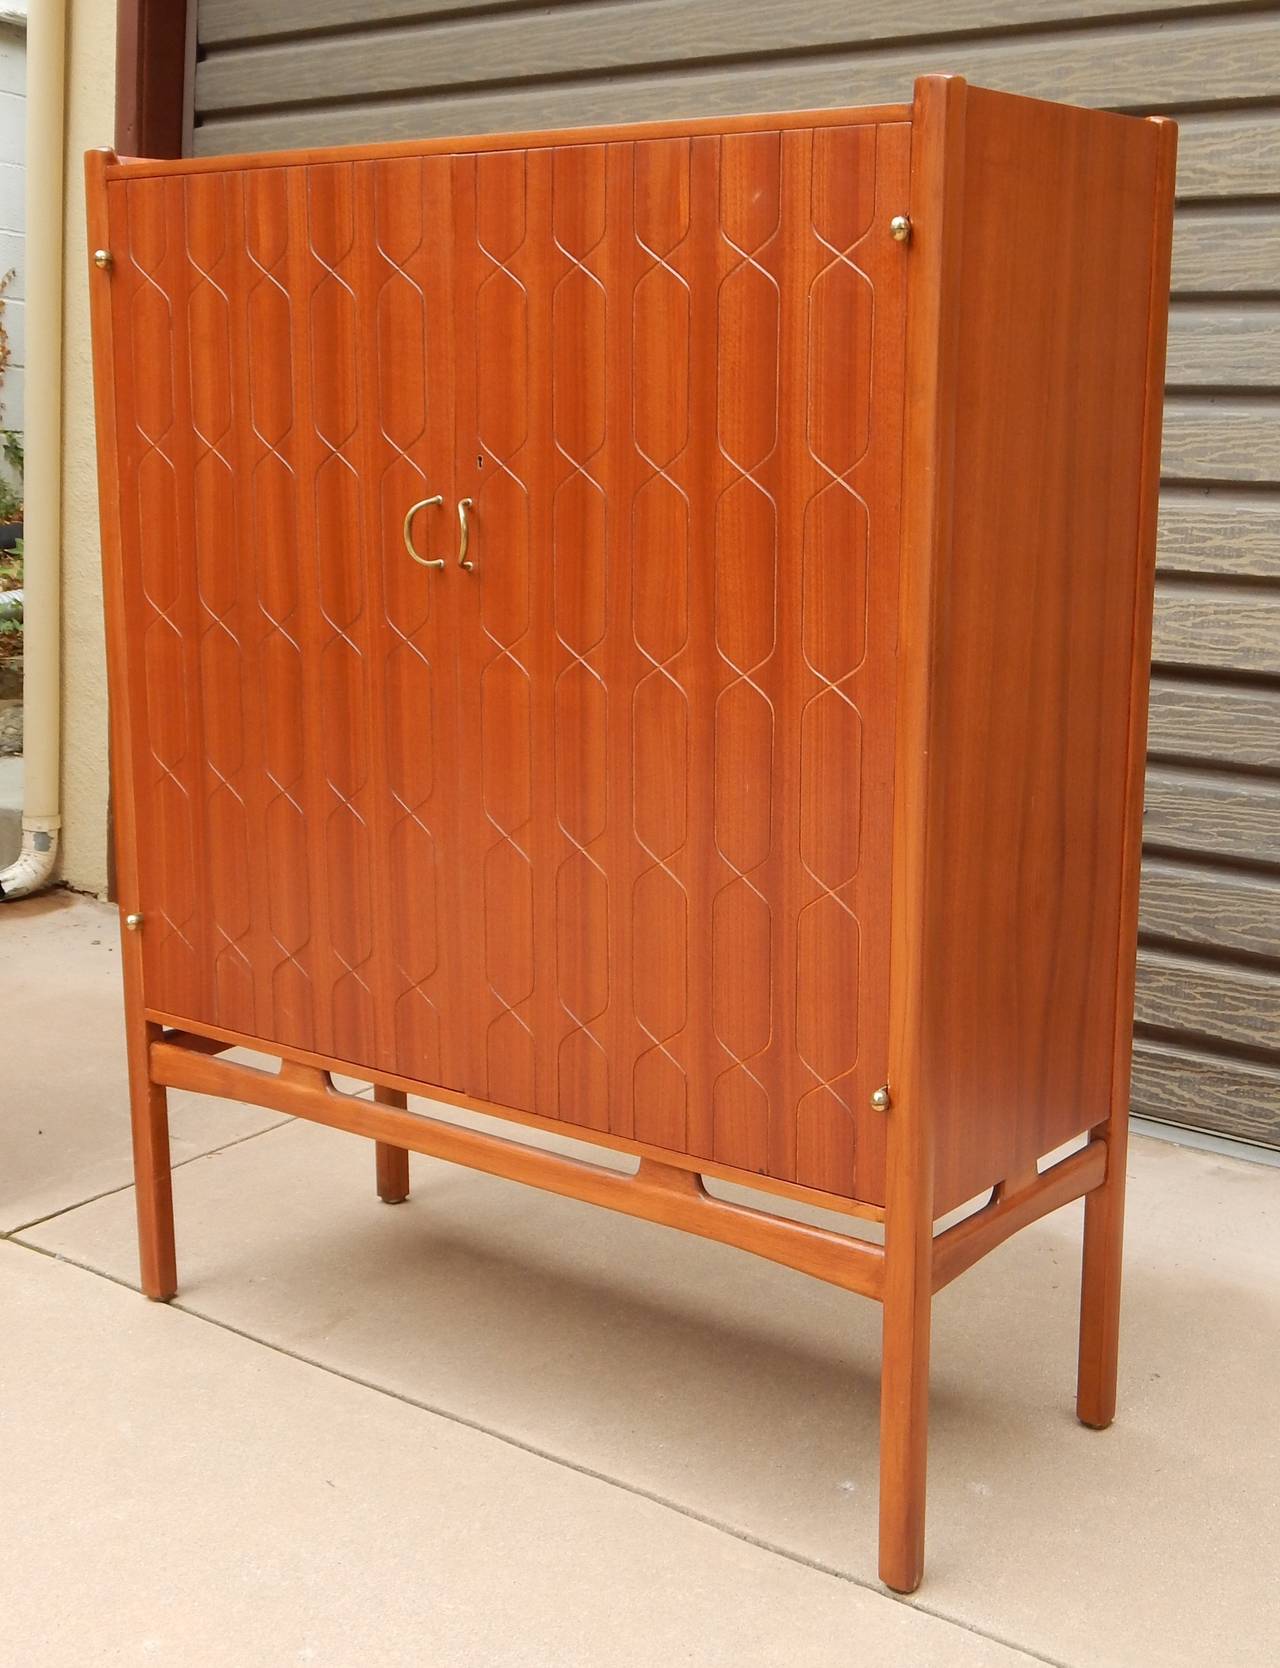 Mid-20th century storage cabinet in teak and birch.
Designed by David Rosén for NK (Nordiska Kompaniet) in Stockholm. Sweden, circa 1950. Interior composed of removable shelves and sliding drawers.
Lightly restored and in excellent antique